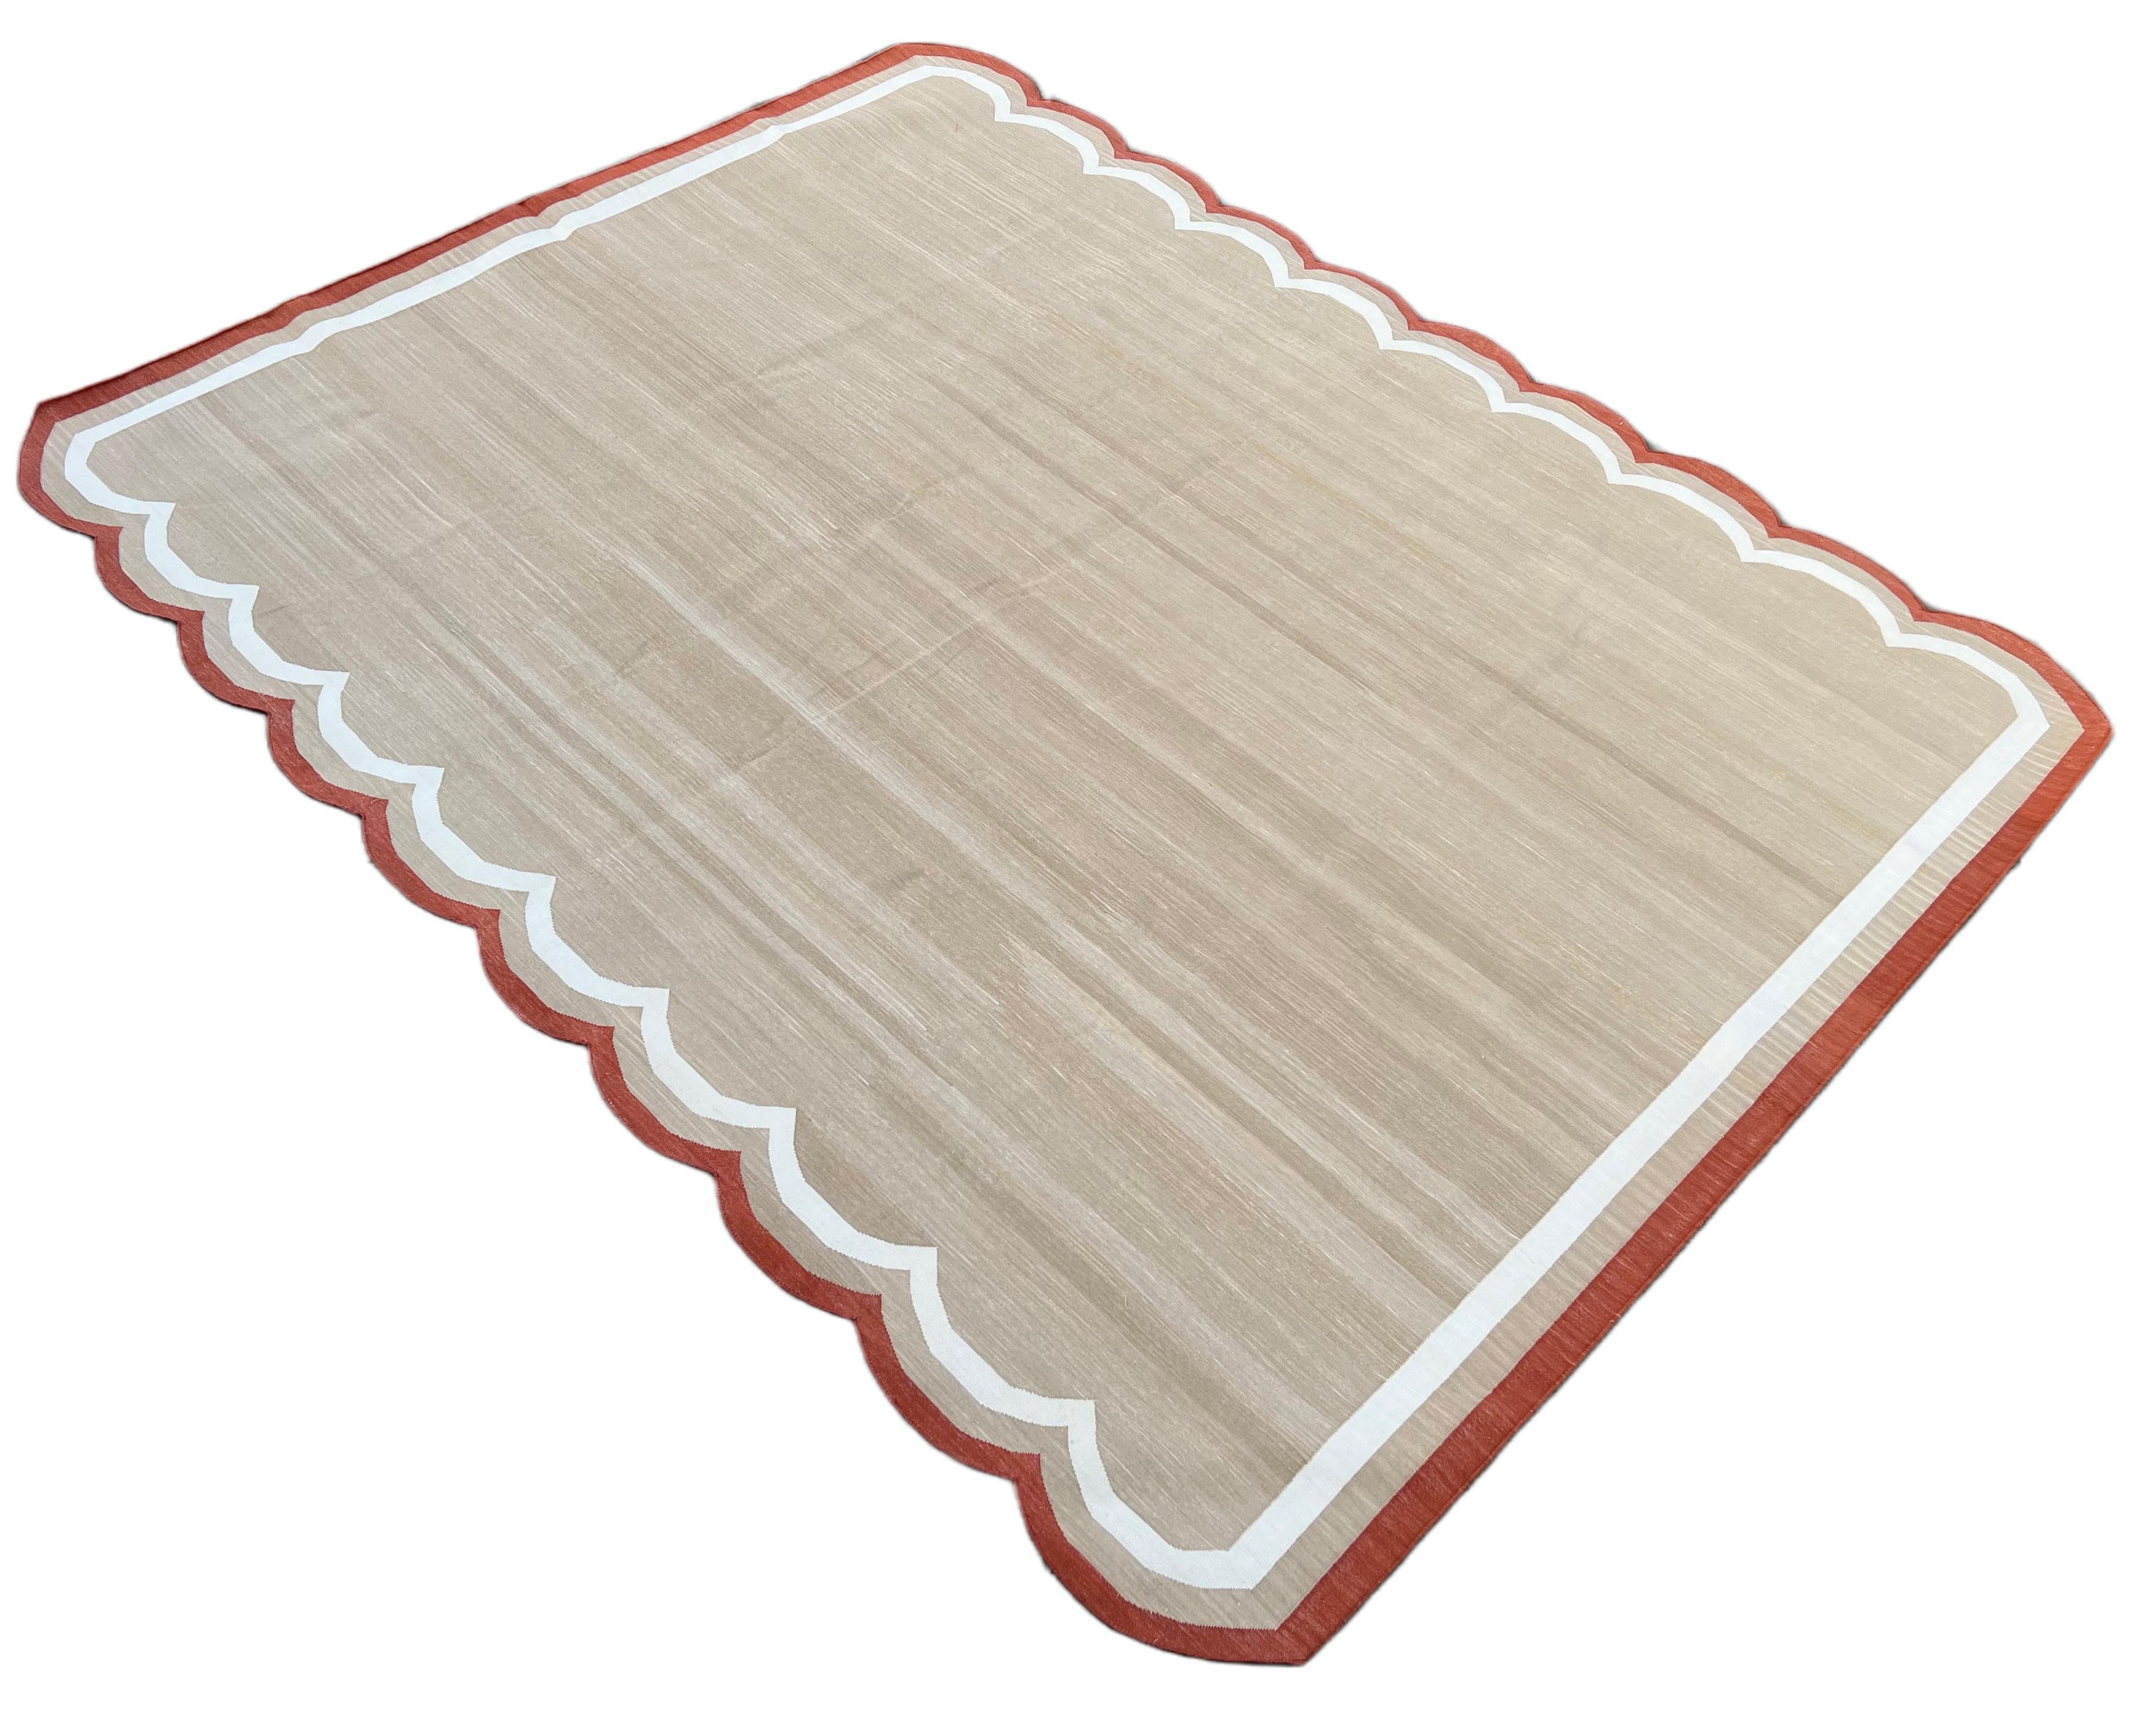 Cotton Vegetable Dyed Beige, Cream And Terracotta Red Two Sided Scalloped Rug-8'x10' 
(Scallops runs on all 10 Feet Sides)
These special flat-weave dhurries are hand-woven with 15 ply 100% cotton yarn. Due to the special manufacturing techniques